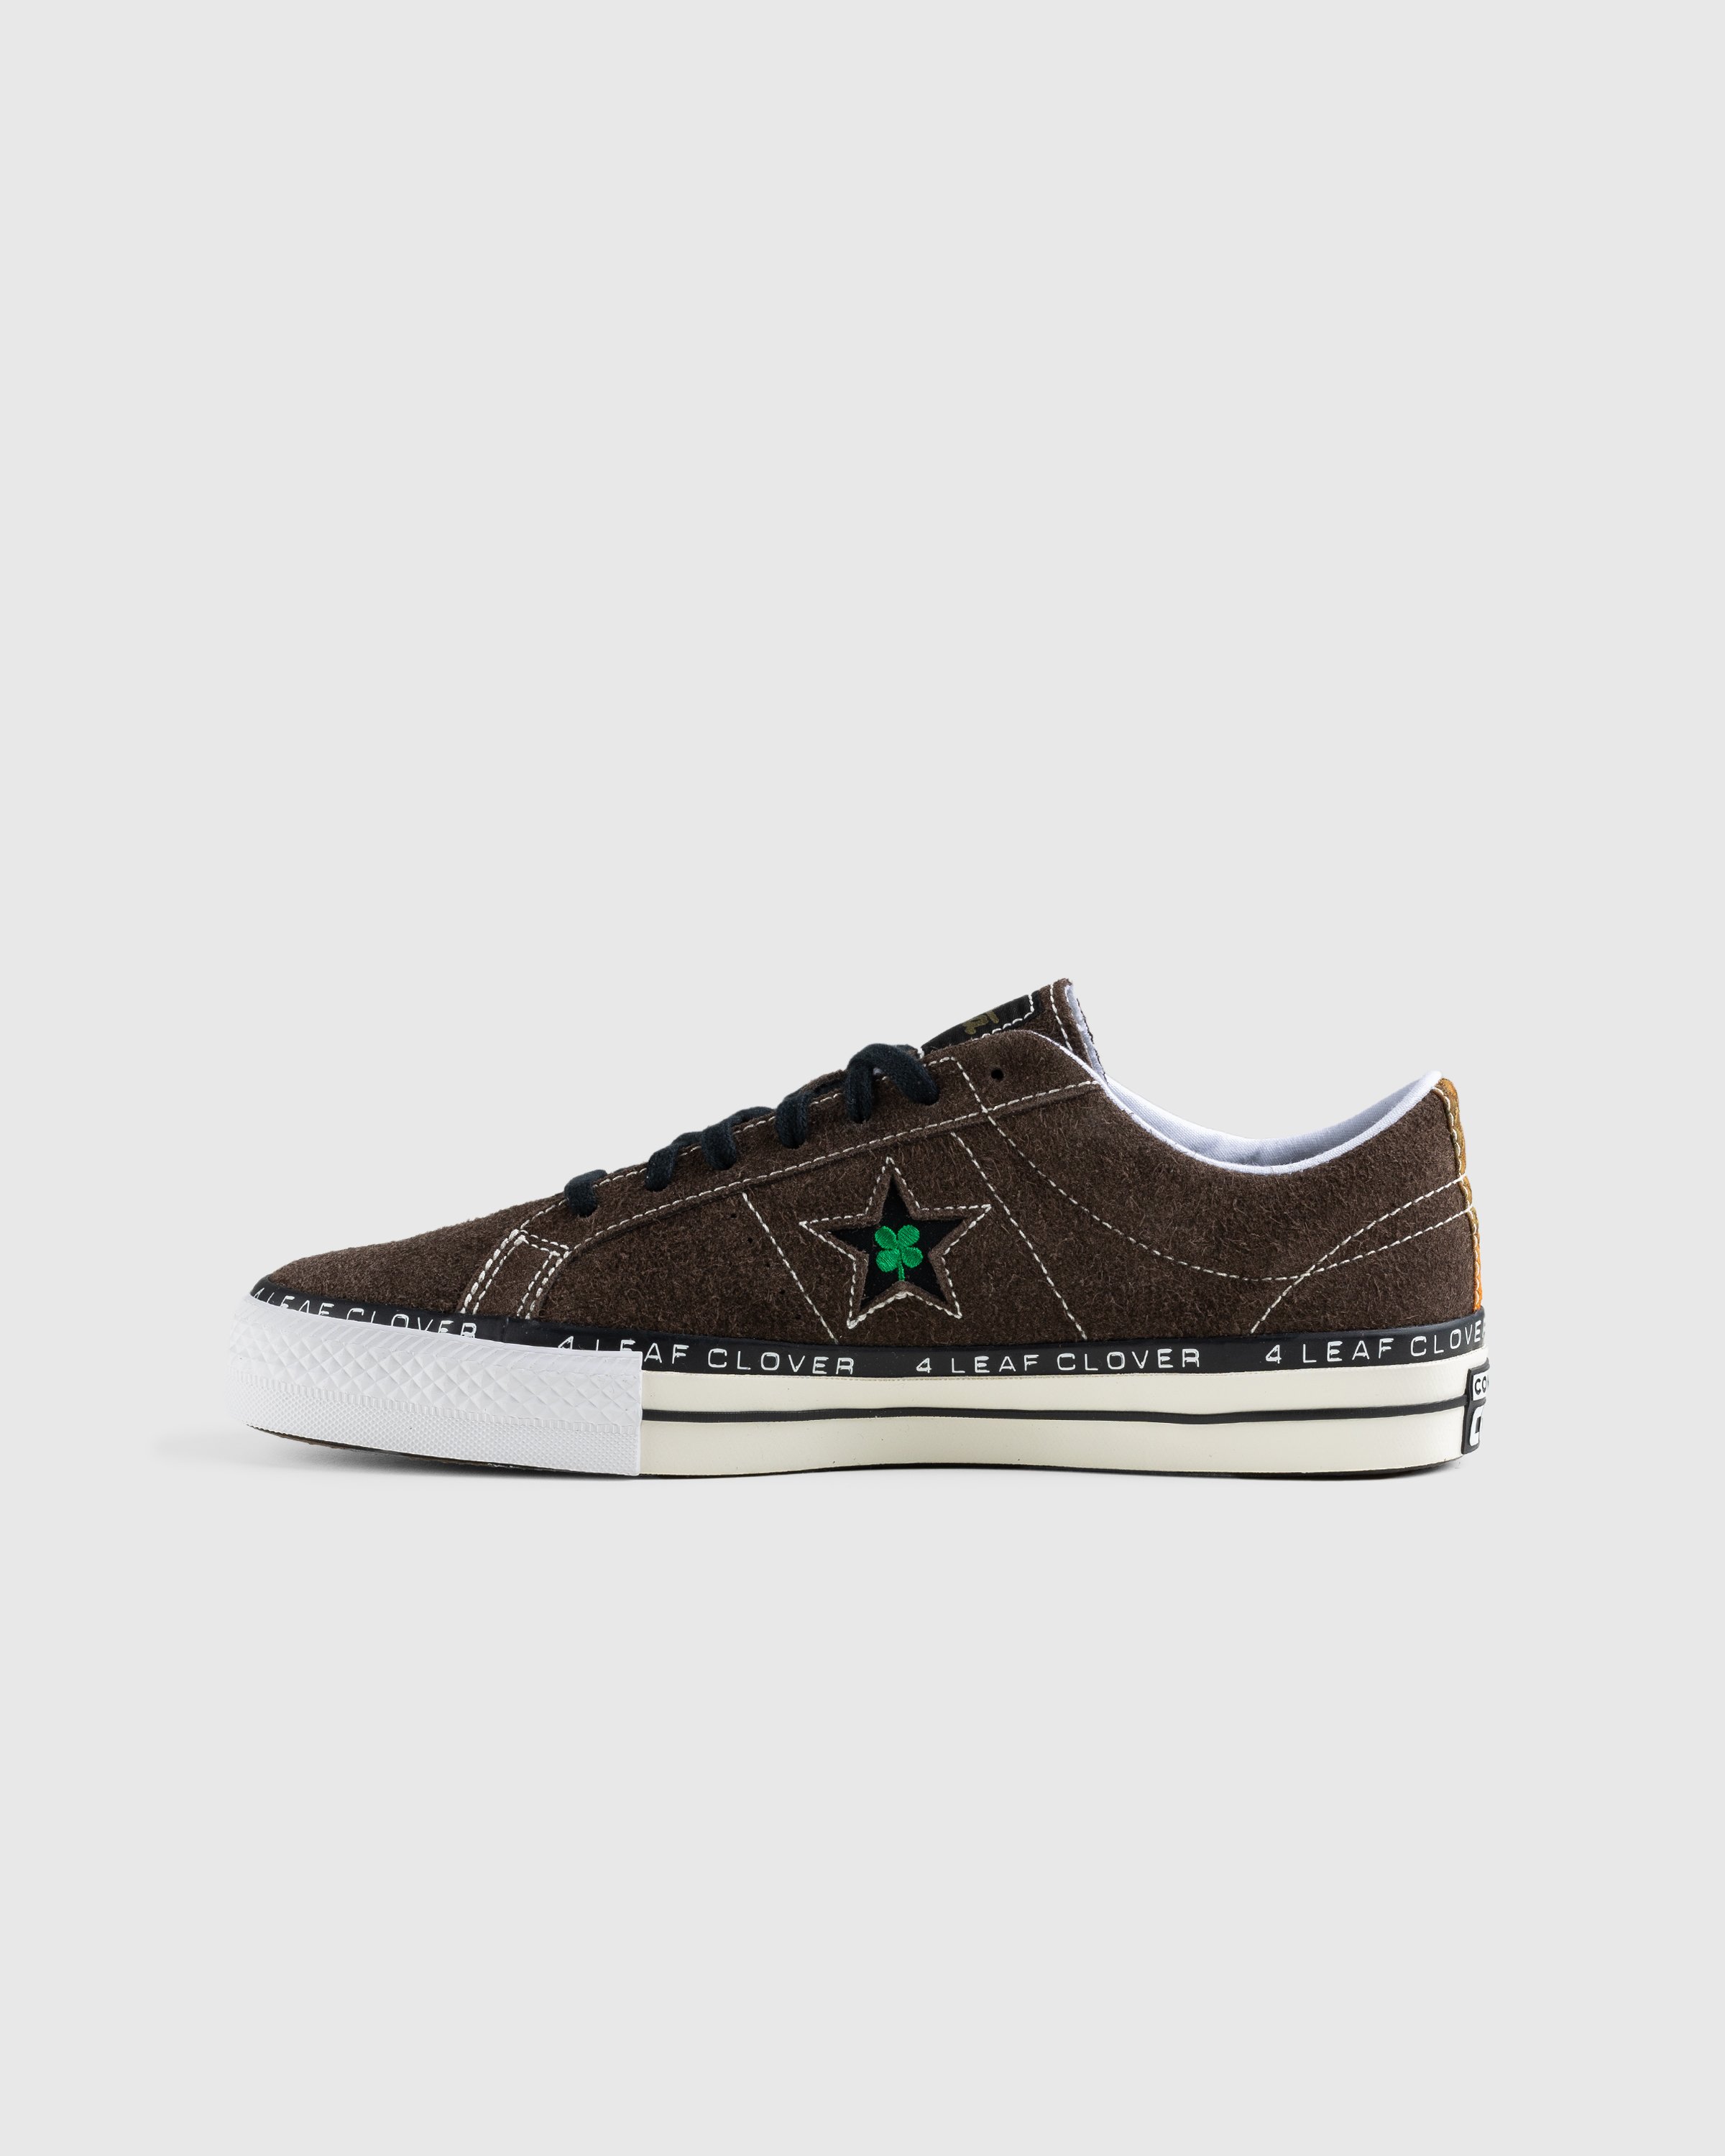 Patta x Converse - “Four Leaf Clover” One Star Pro - Footwear - Brown - Image 2